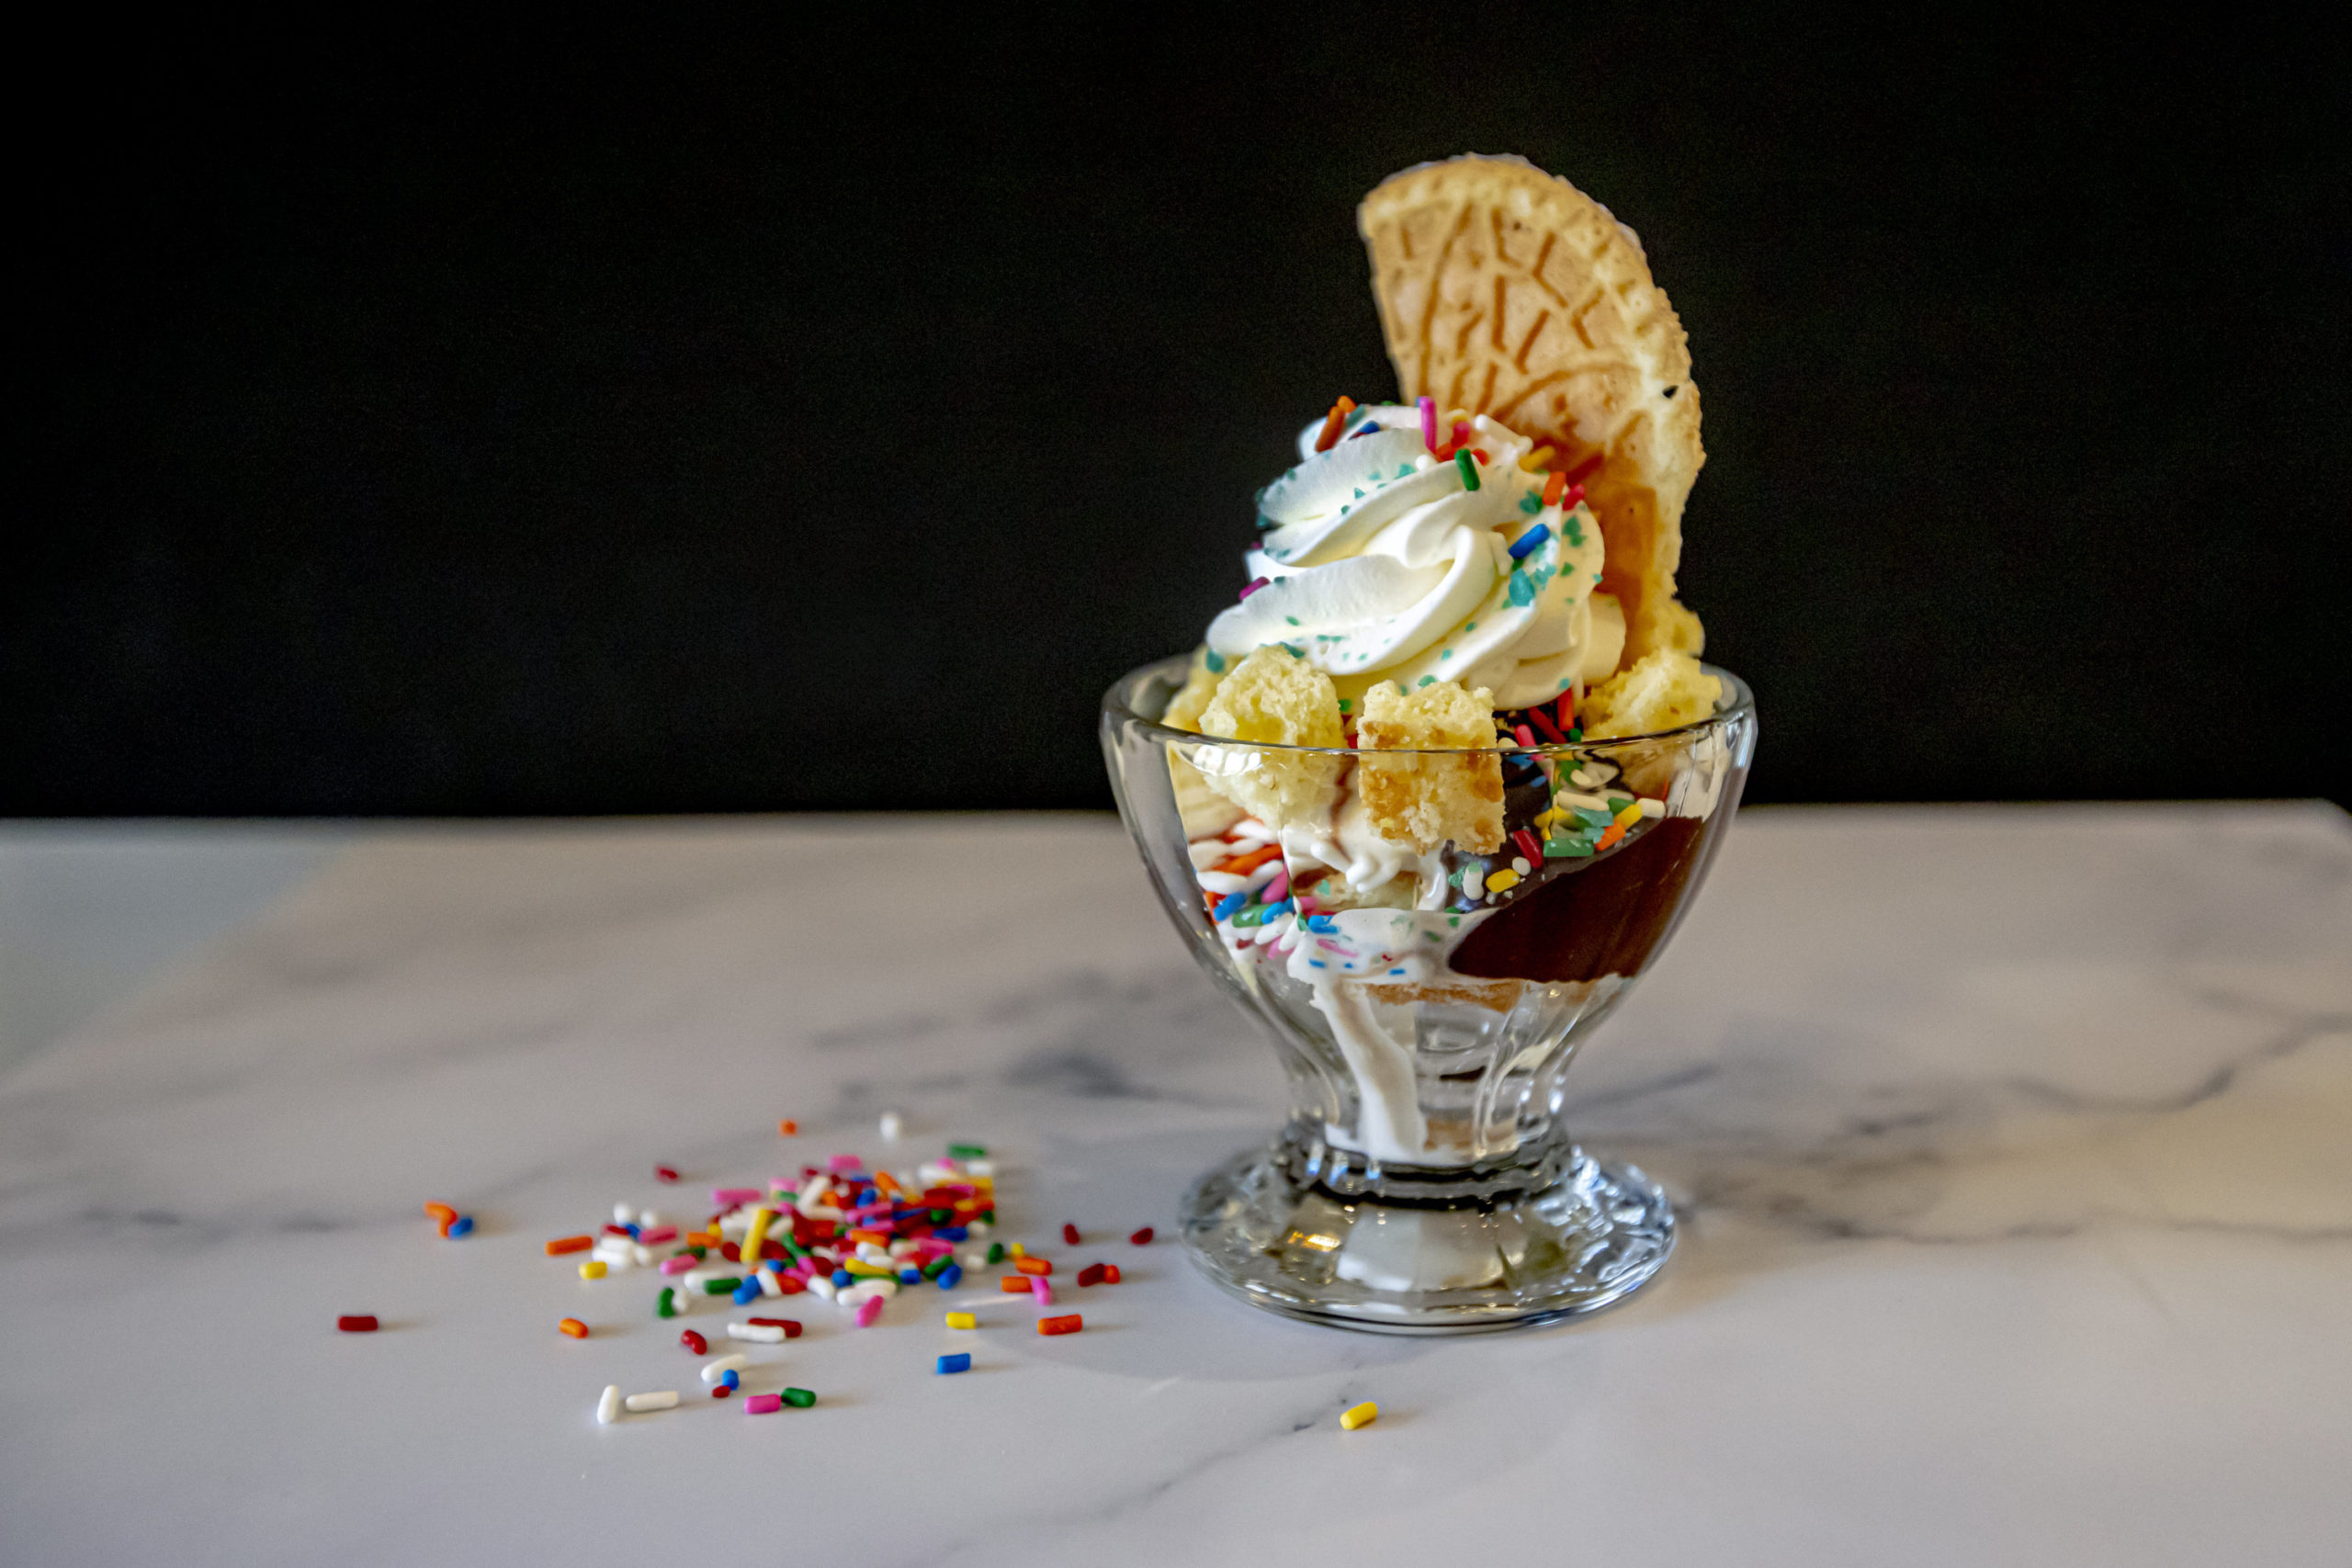 The Best Ice Cream Scoops of 2020: Make Your Sundae in Style